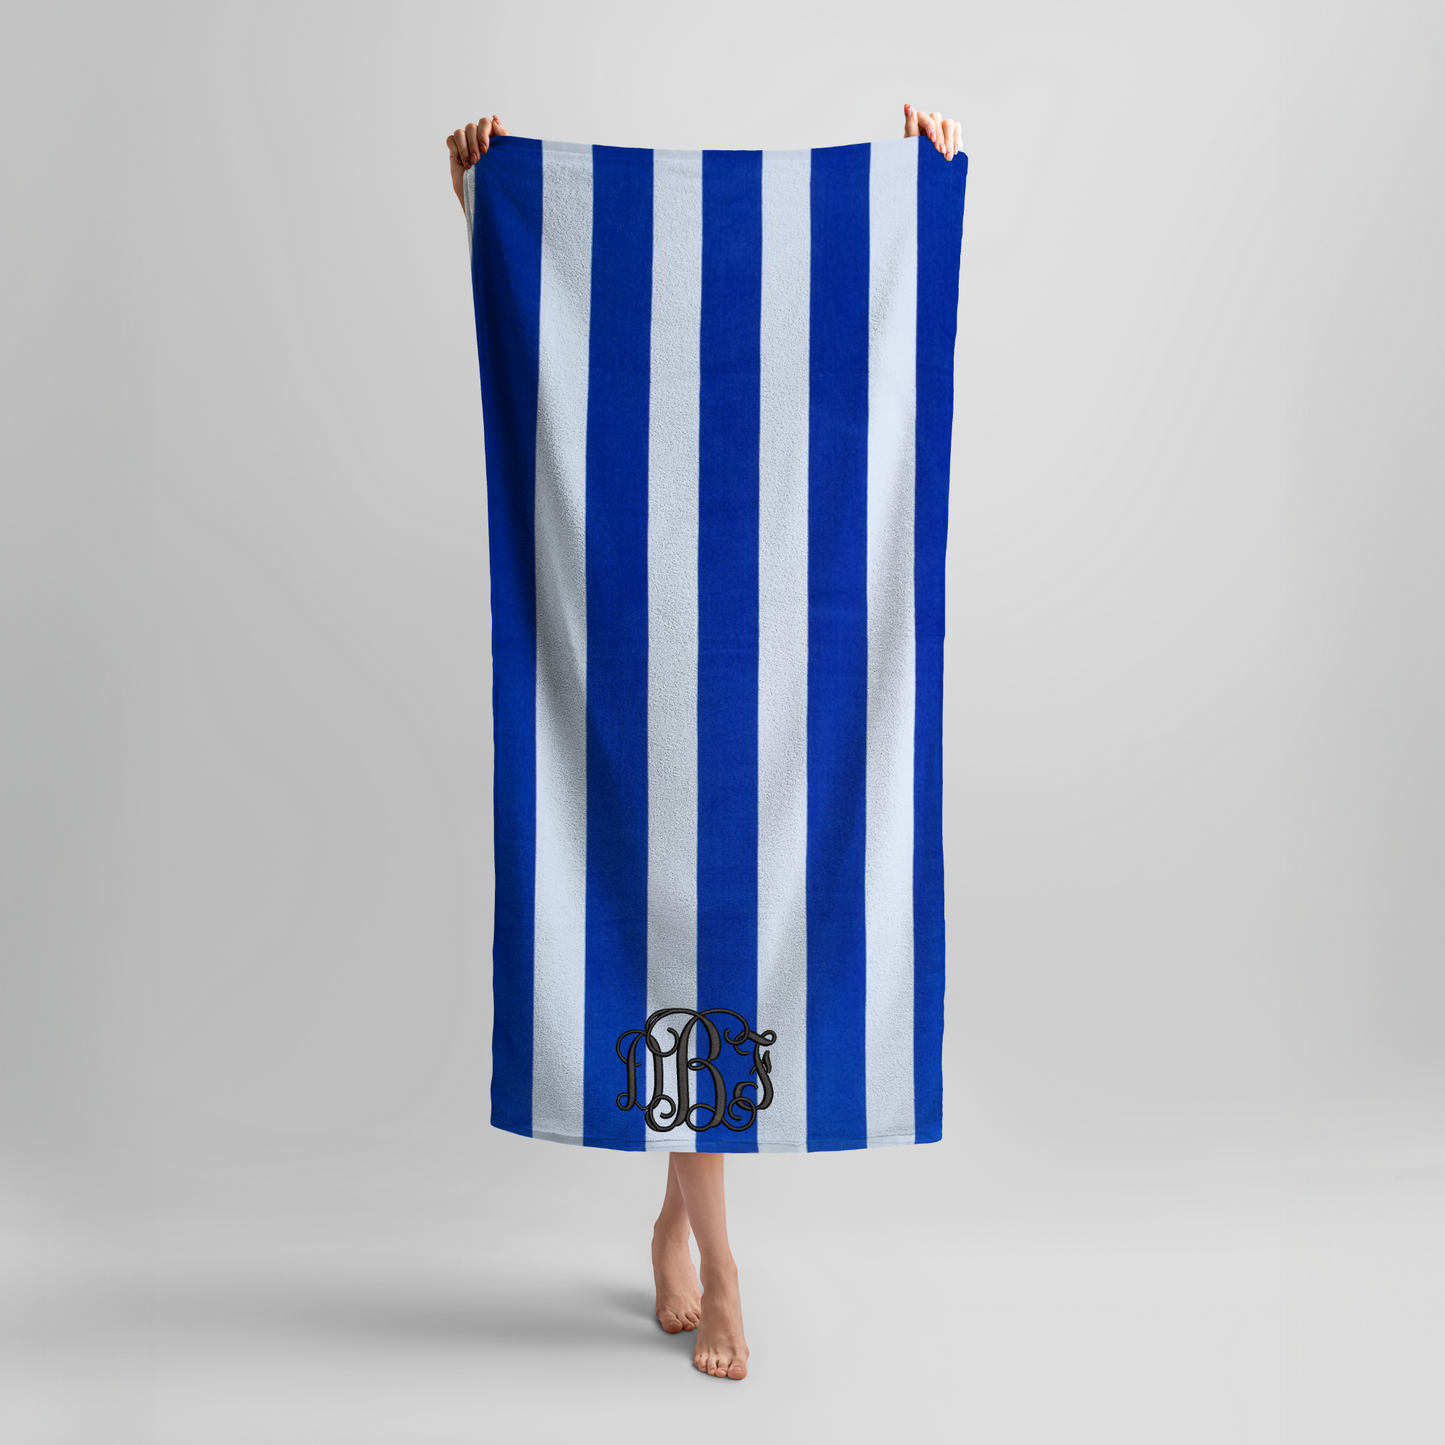 Custom Embroidered Striped Beach Towels